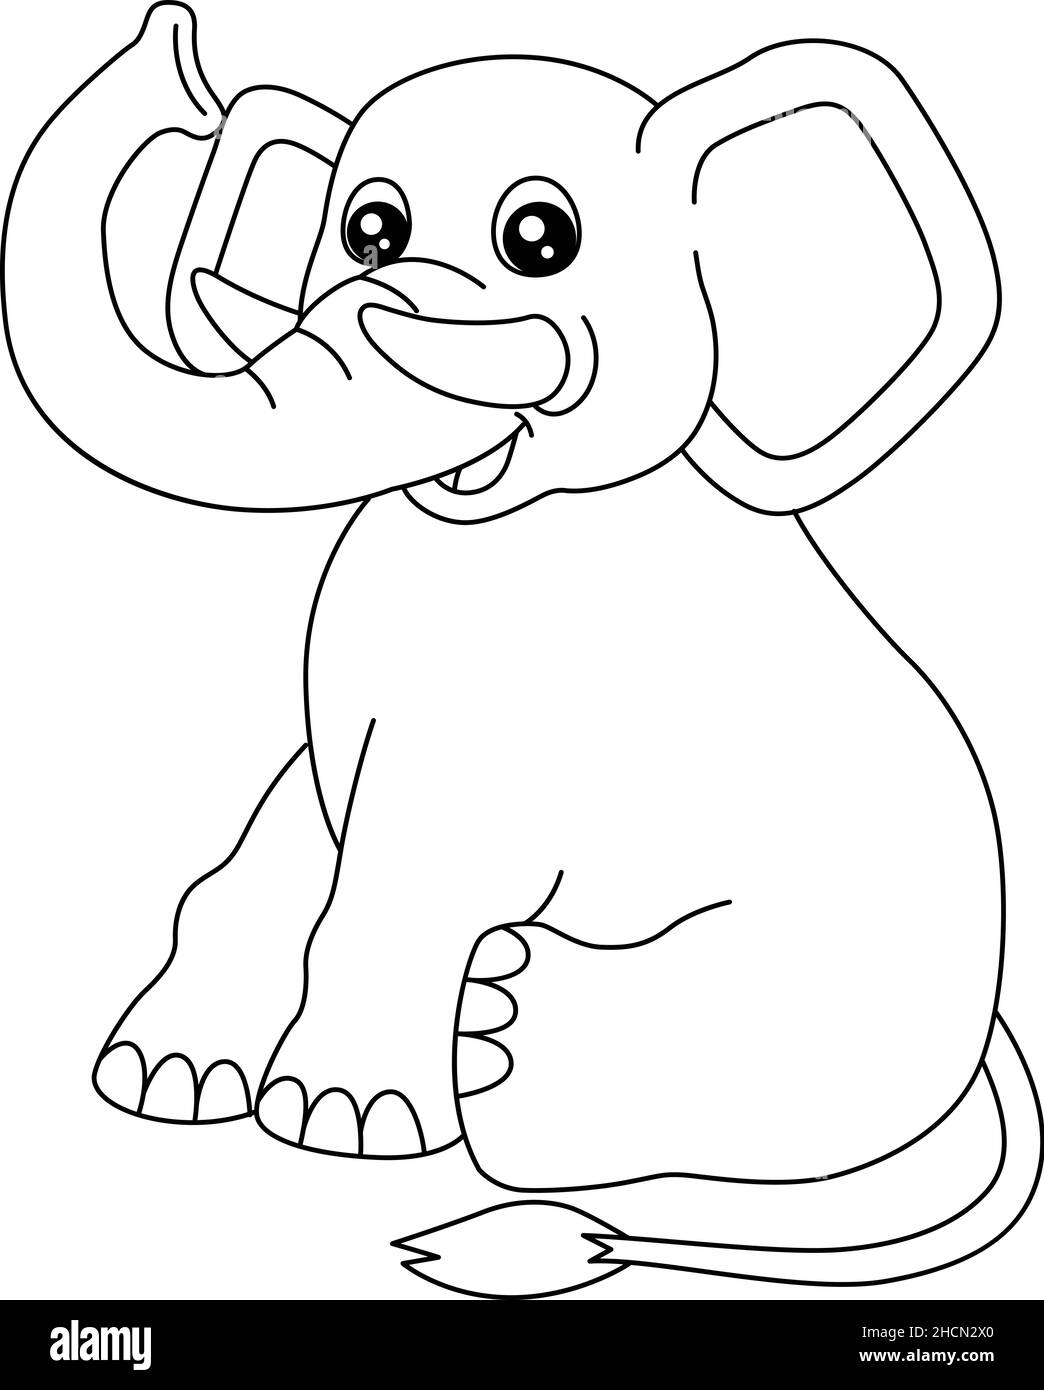 Elephant Coloring Page Isolated for Kids Stock Vector Image & Art ...